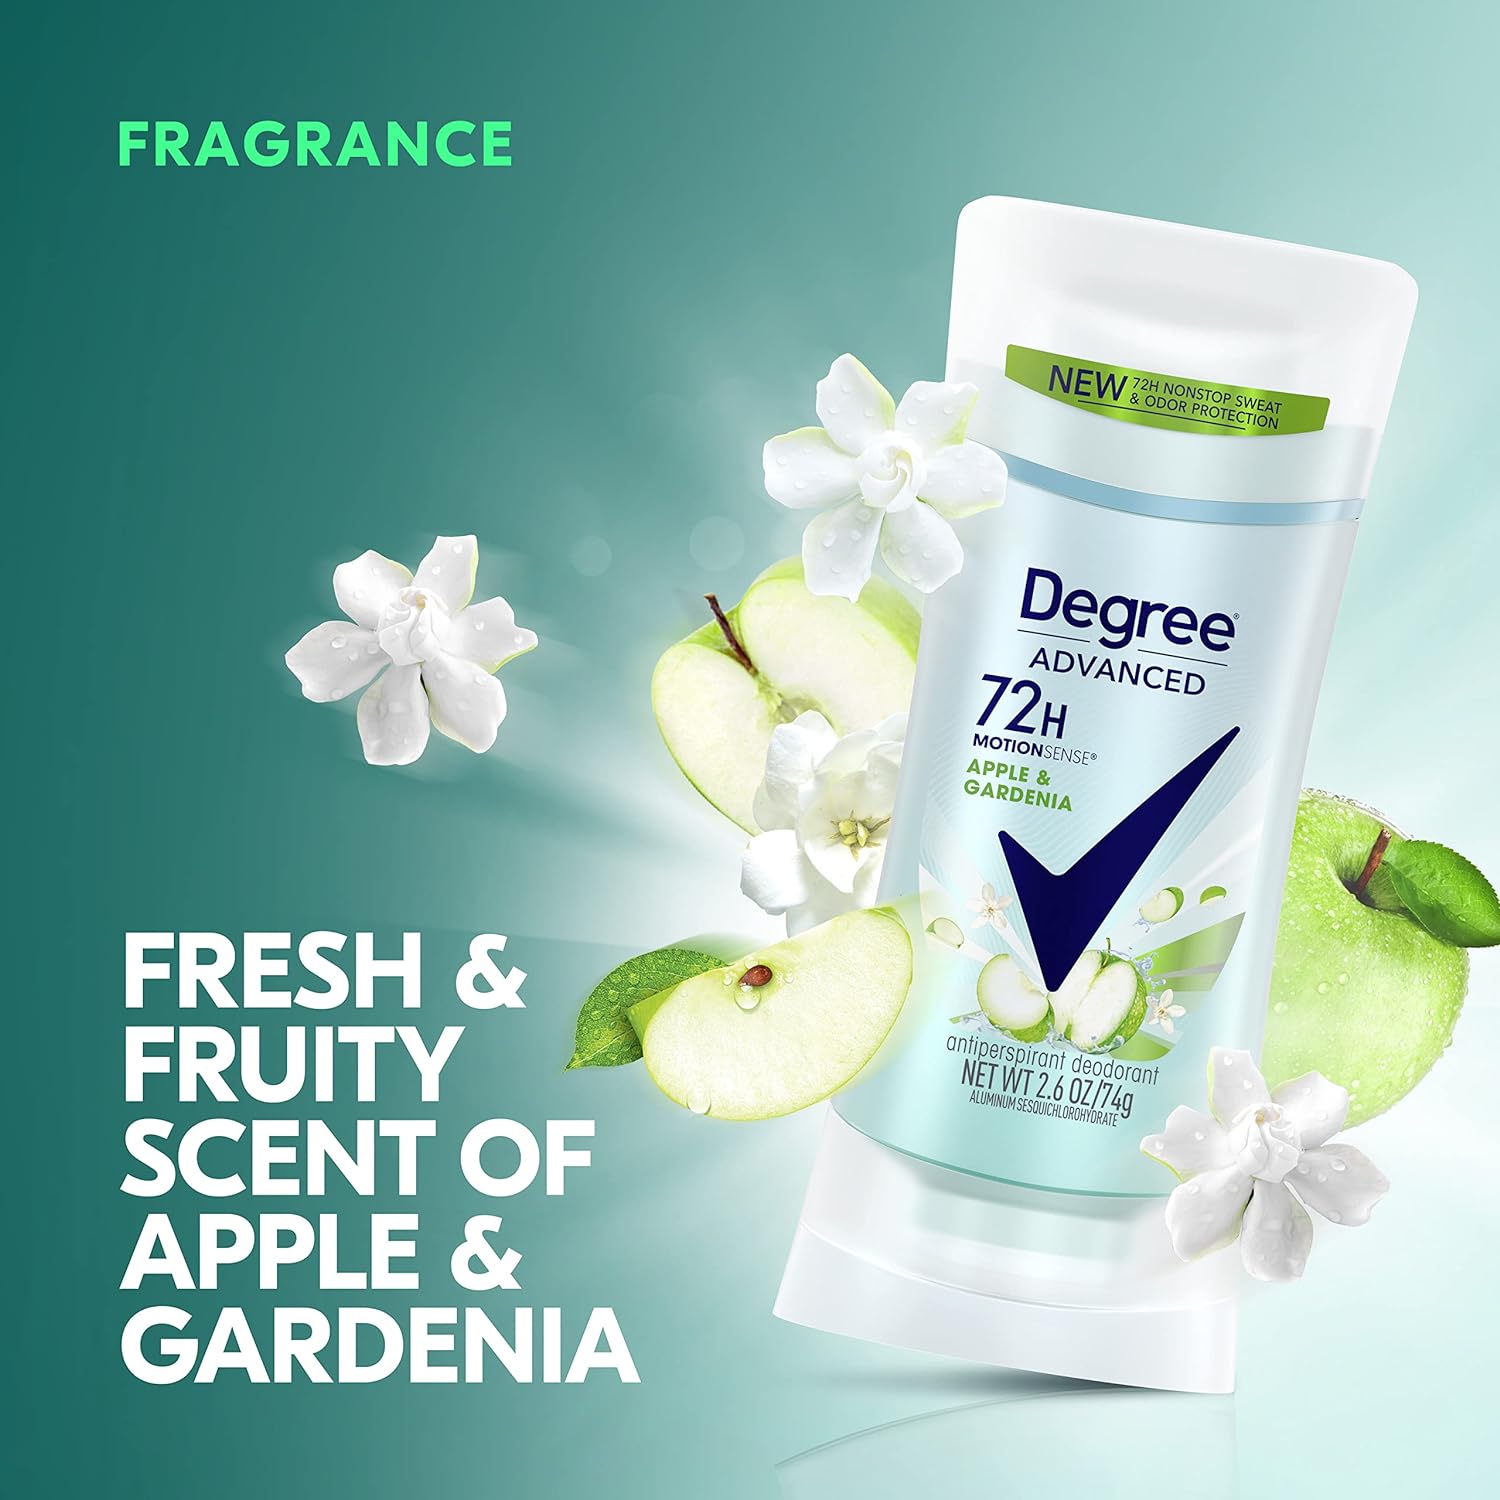 Degree Advanced Antiperspirant Deodorant 72-Hour Sweat & Odor Protection Apple & Gardenia Deodorant for Women with MotionSense Technology 2.6 oz, Pack of 4 : Beauty & Personal Care